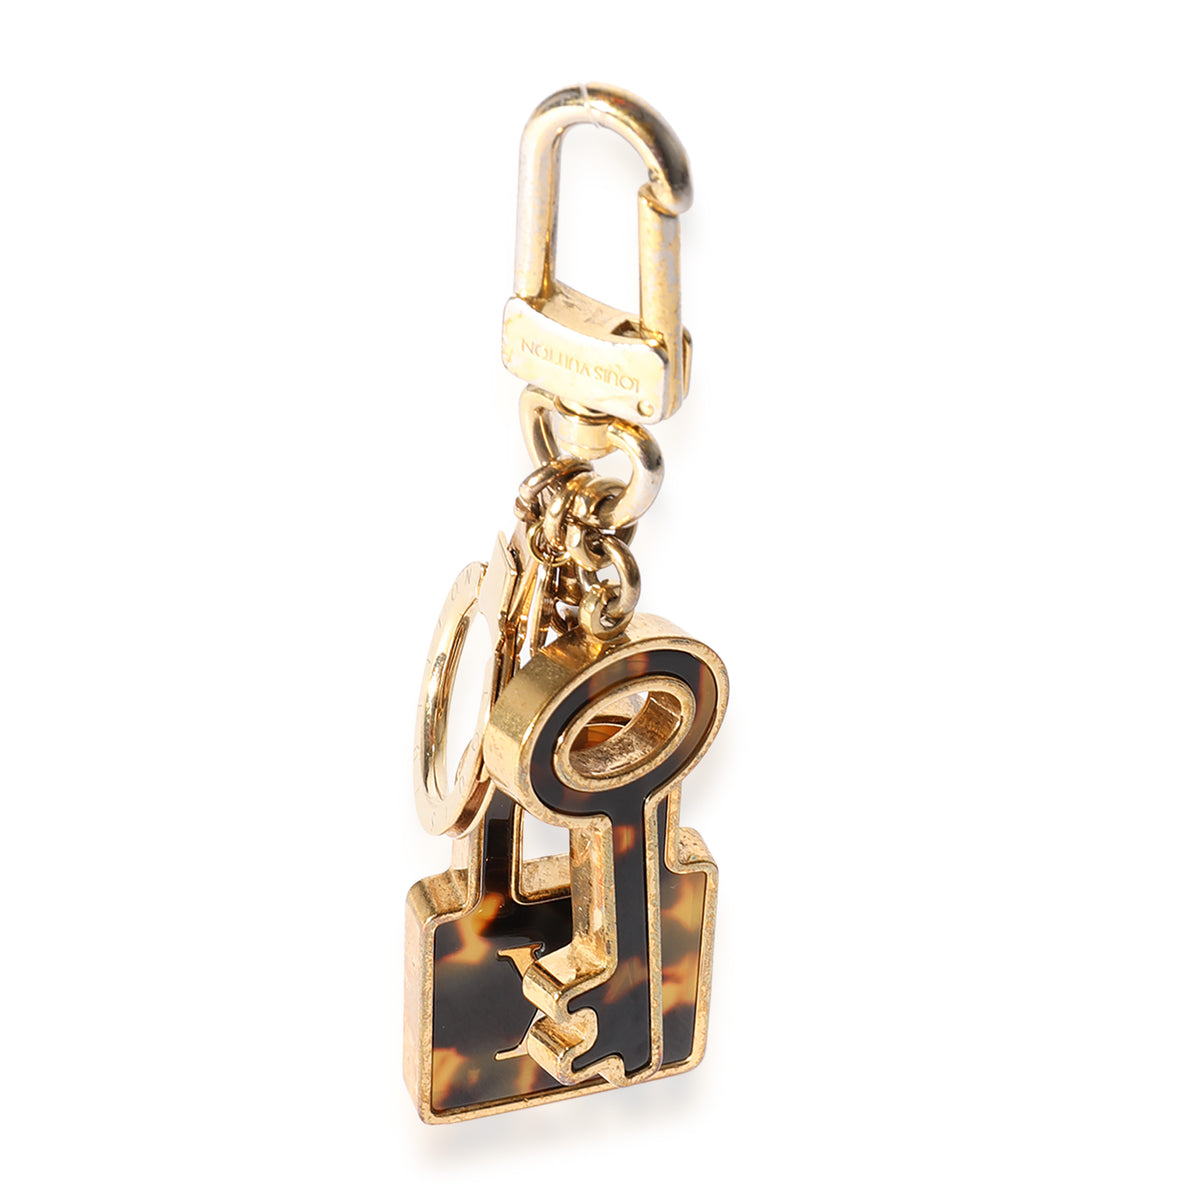 Vintage Louis Vuitton Yellow Gold and Enamel Purse Charm For Sale